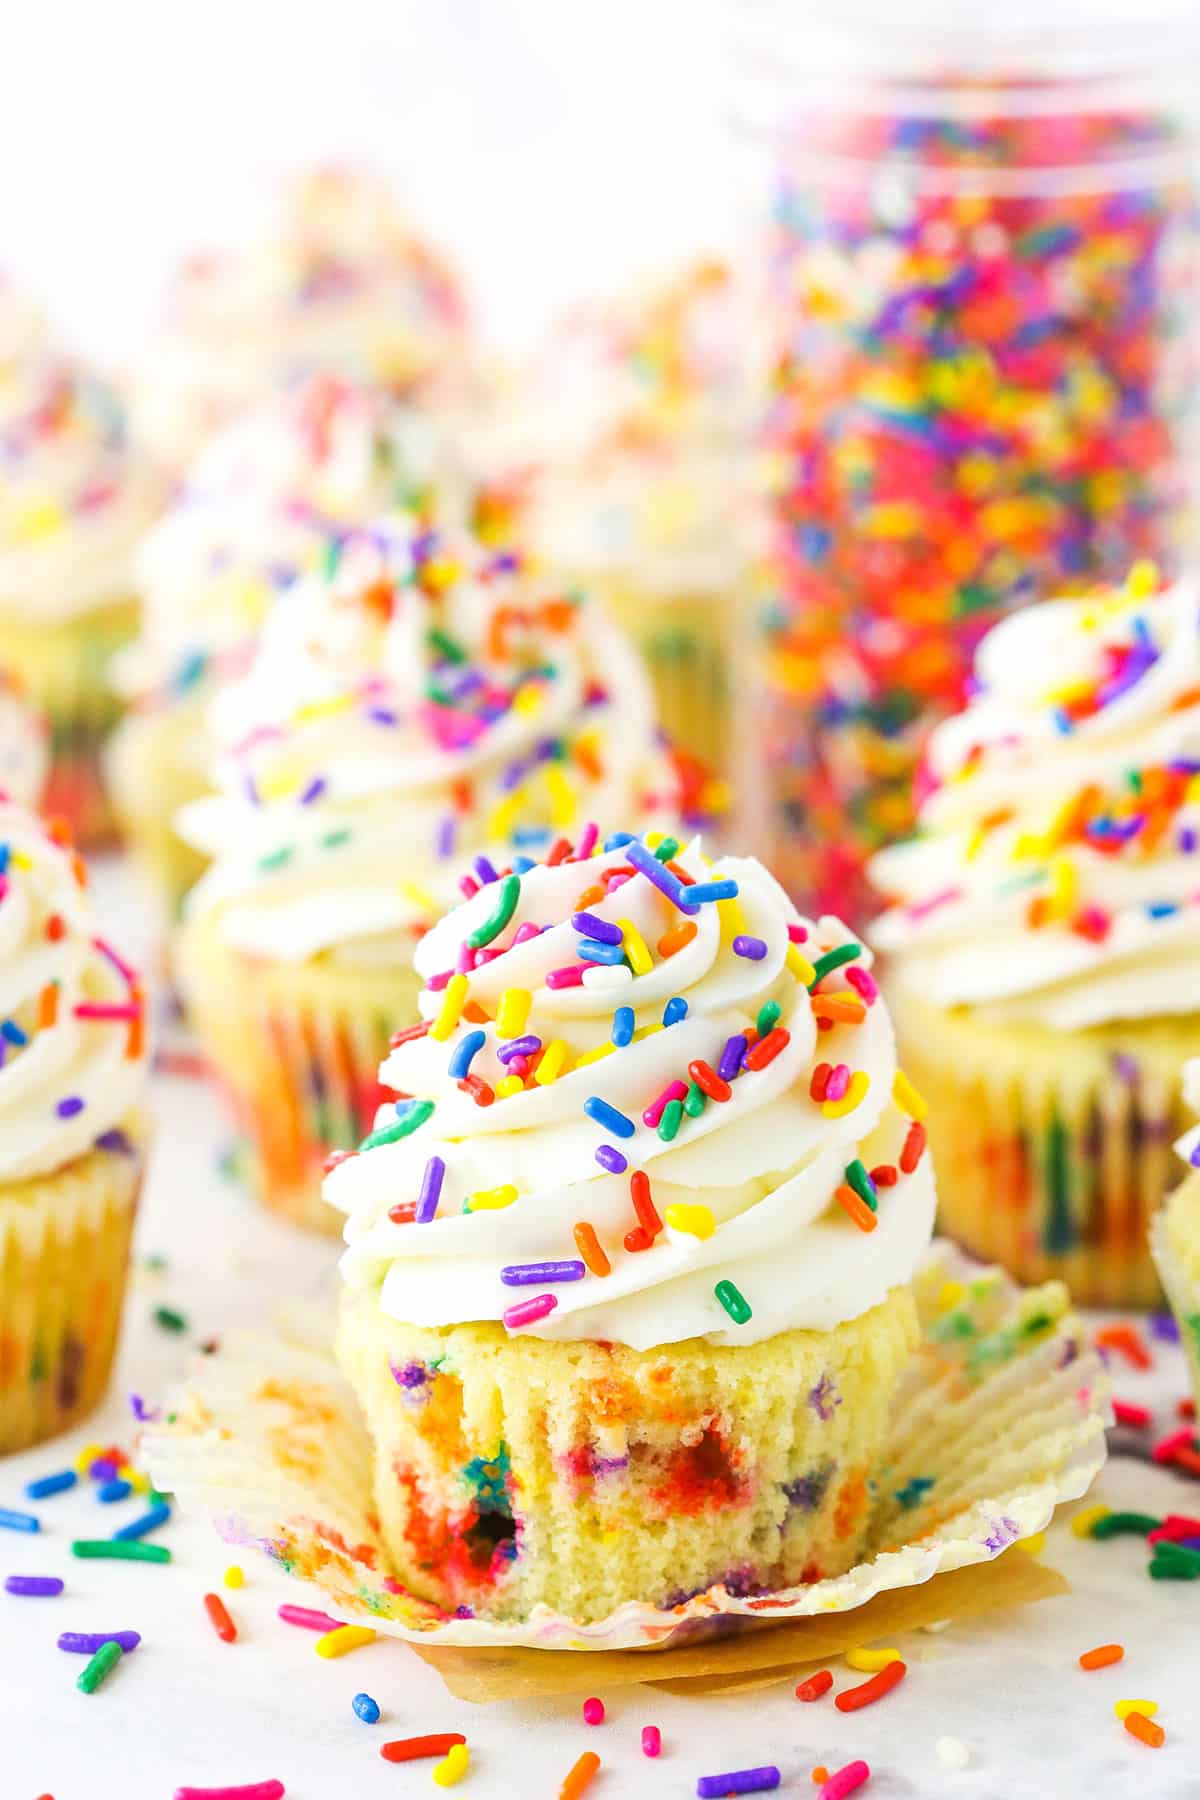 Homemade Funfetti Cupcakes topped with white frosting and colorful sprinkles